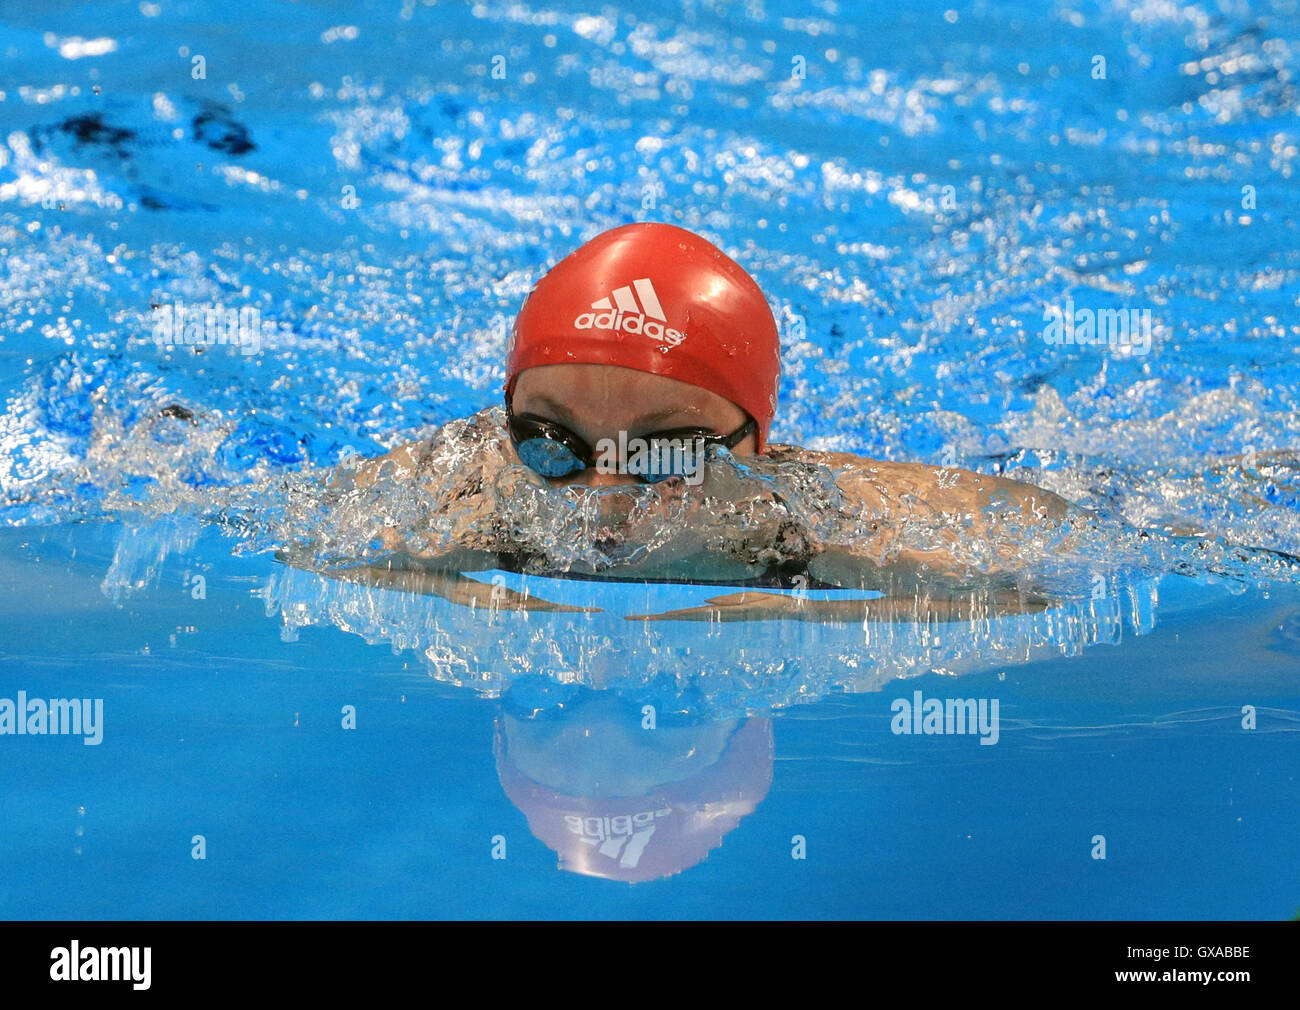 Great Britain's Ellie Simmonds competes in the Women's SB6 100 metre Breaststroke during the eighth day of the 2016 Rio Paralympic Games in Rio de Janeiro, Brazil. Stock Photo